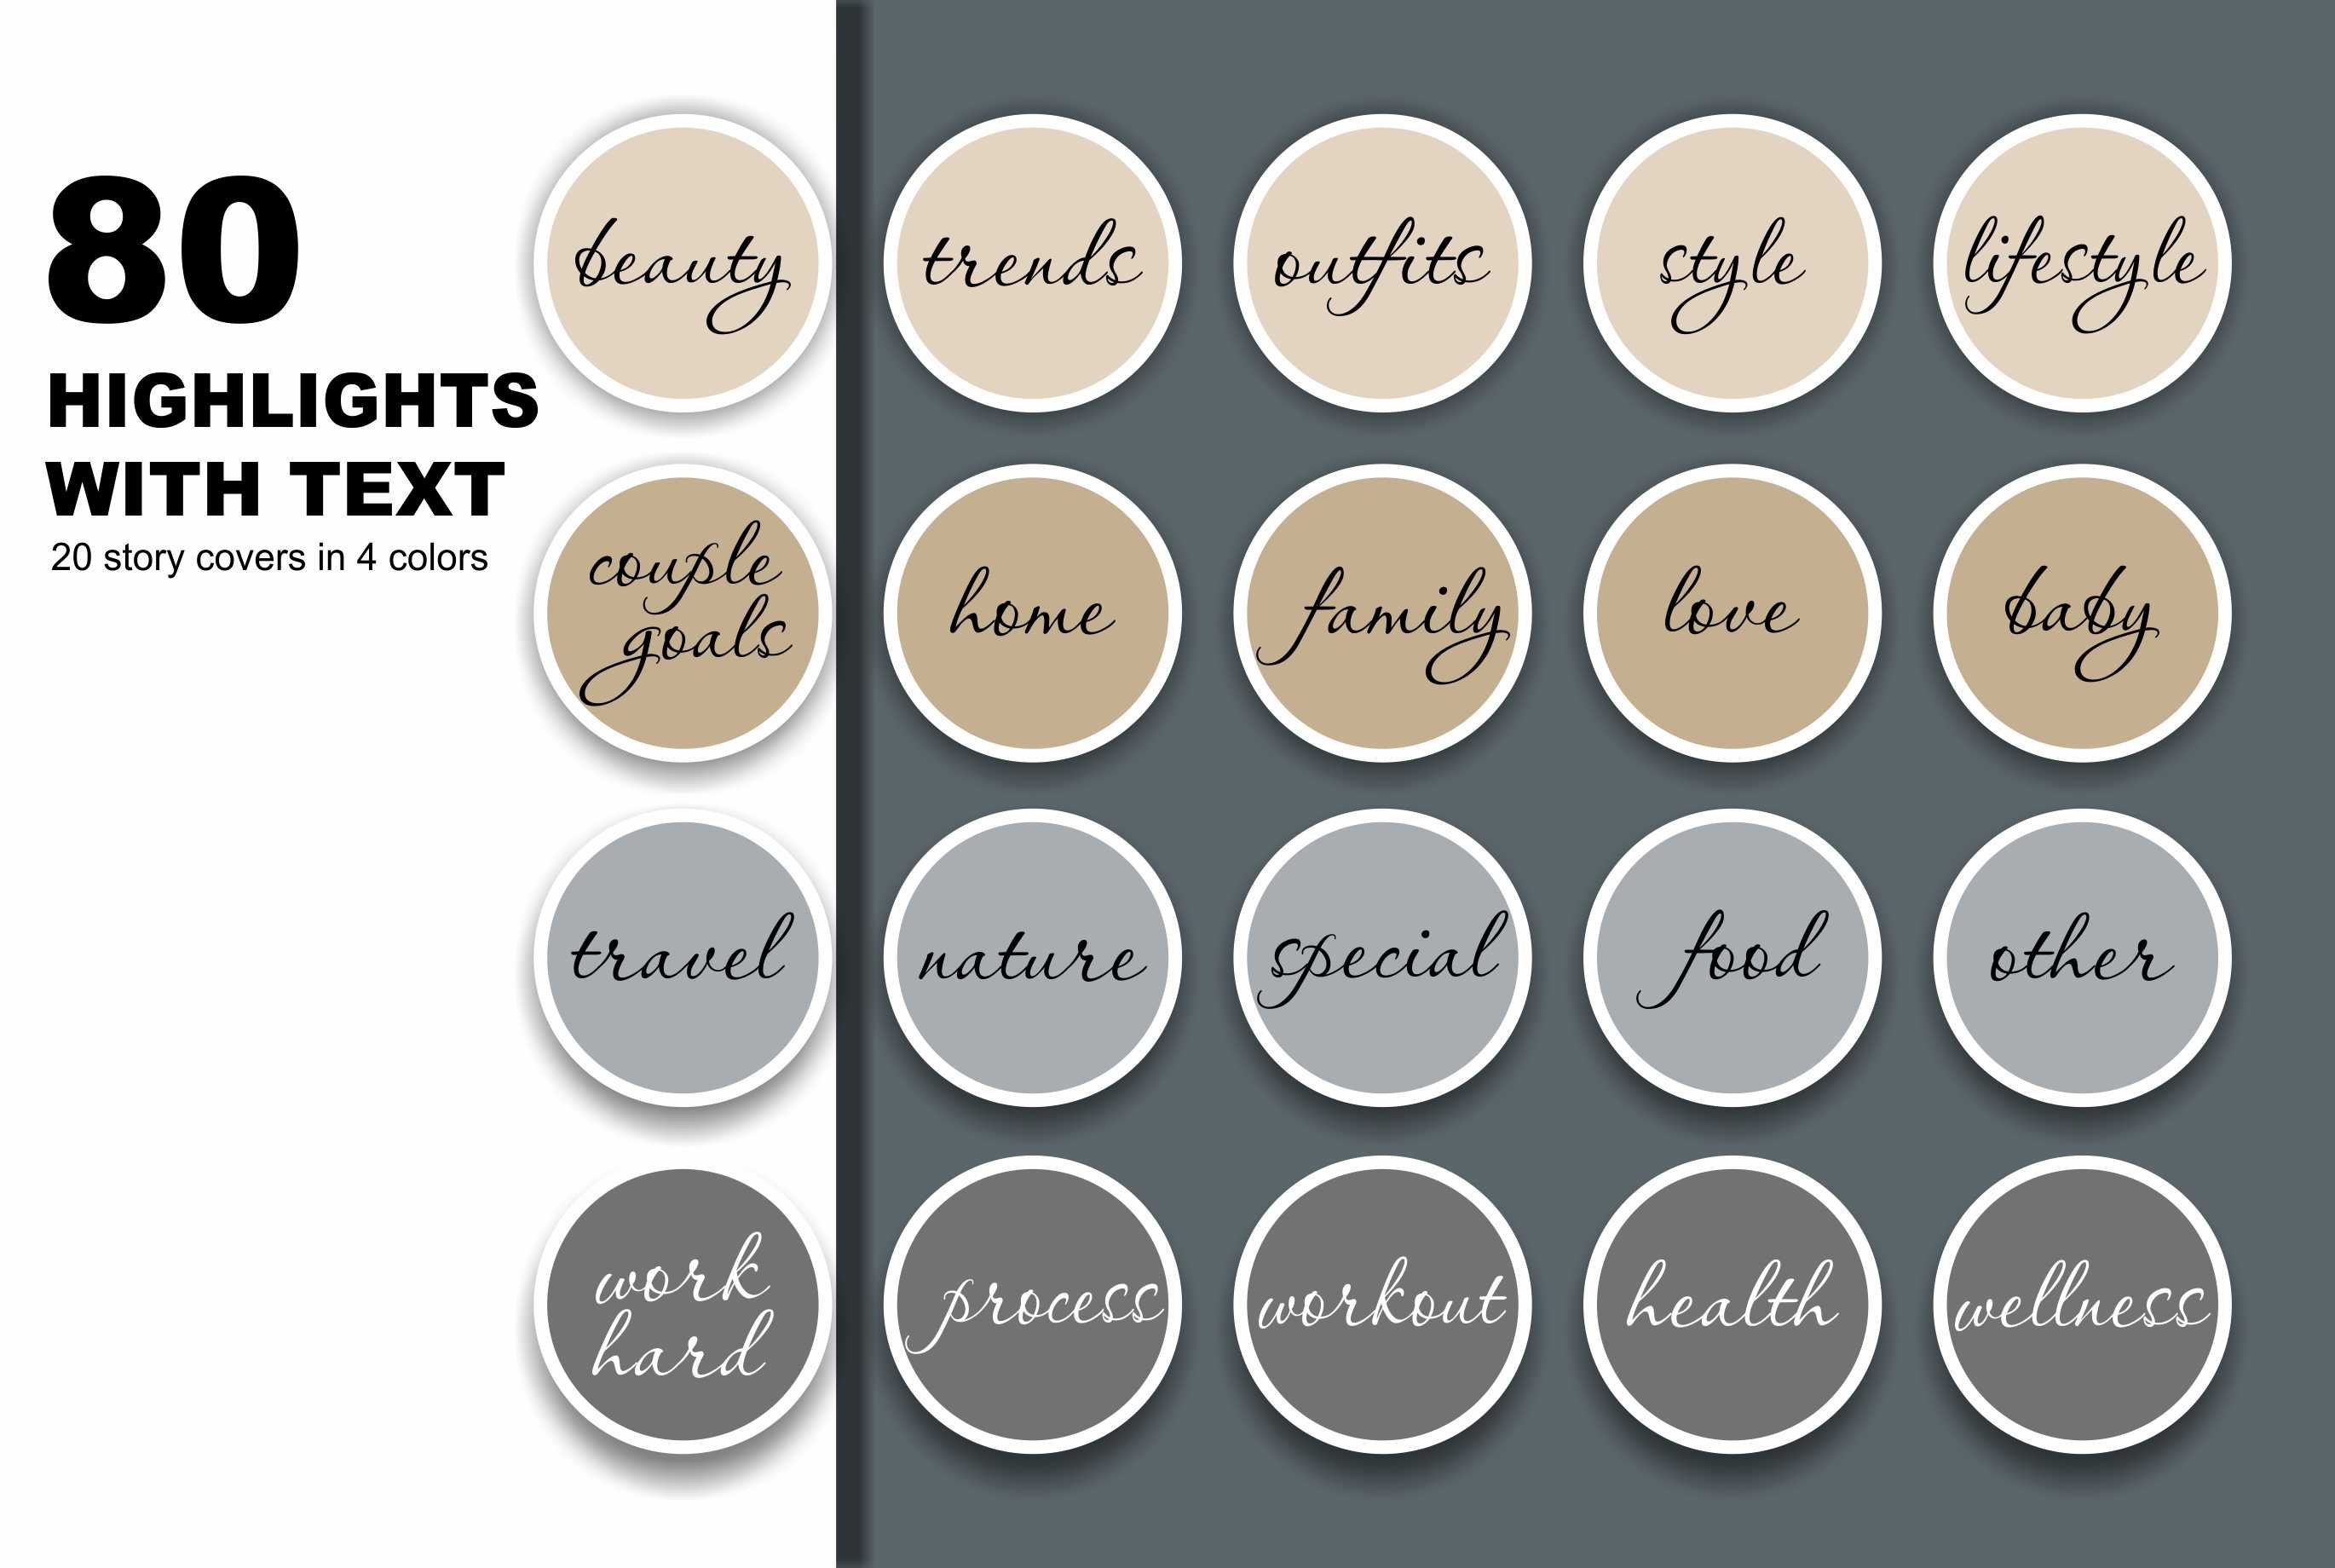 Pastel highlight collection with text.